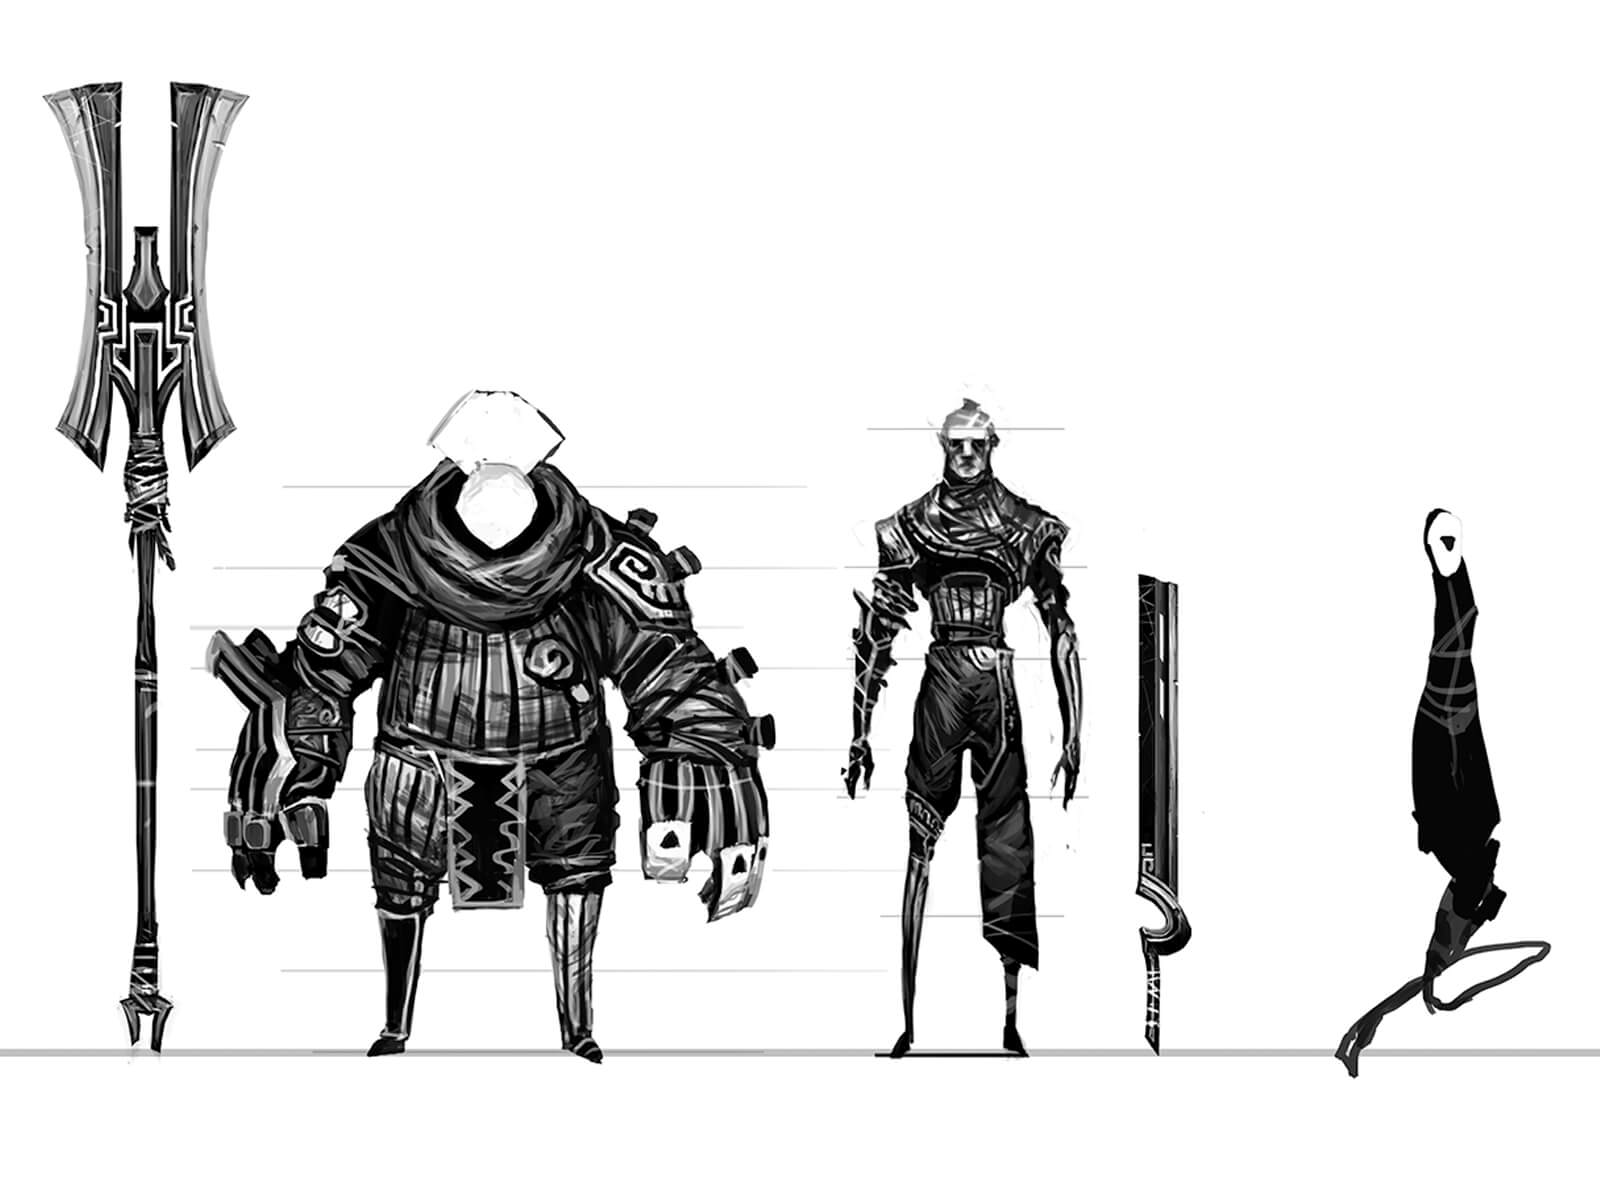 Black-and-white sketches of warriors in ornate battle gear standing face-forward next to their oversize weapons.